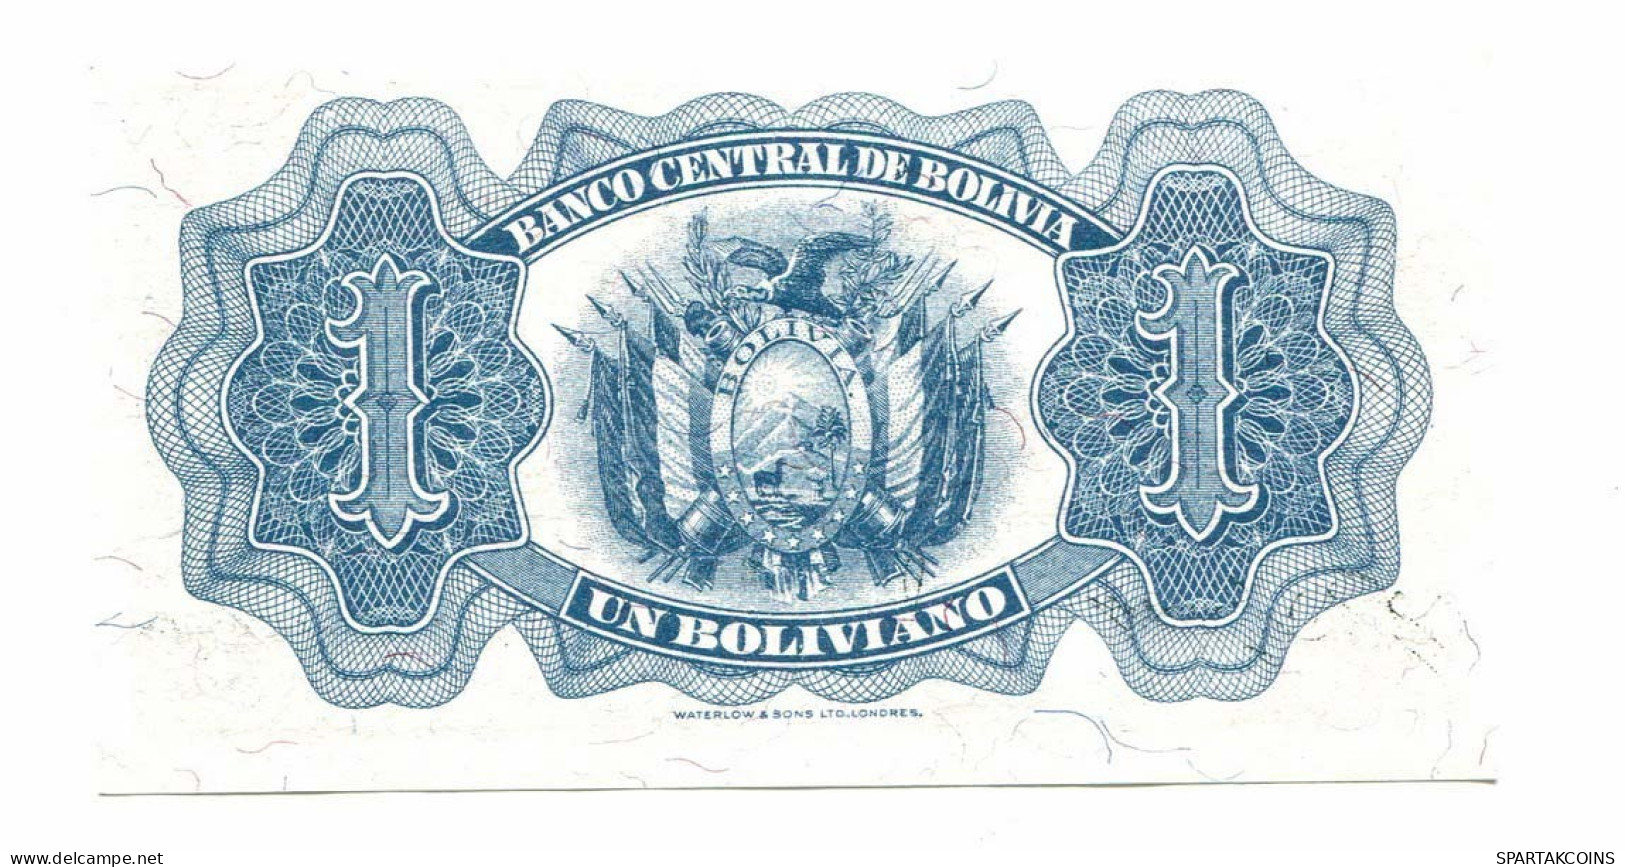 BOLIVIA 1 BOLIVIANO 1928 SERIE L15 Emision 1952 AUNC Paper Money #P10784.4 - [11] Local Banknote Issues